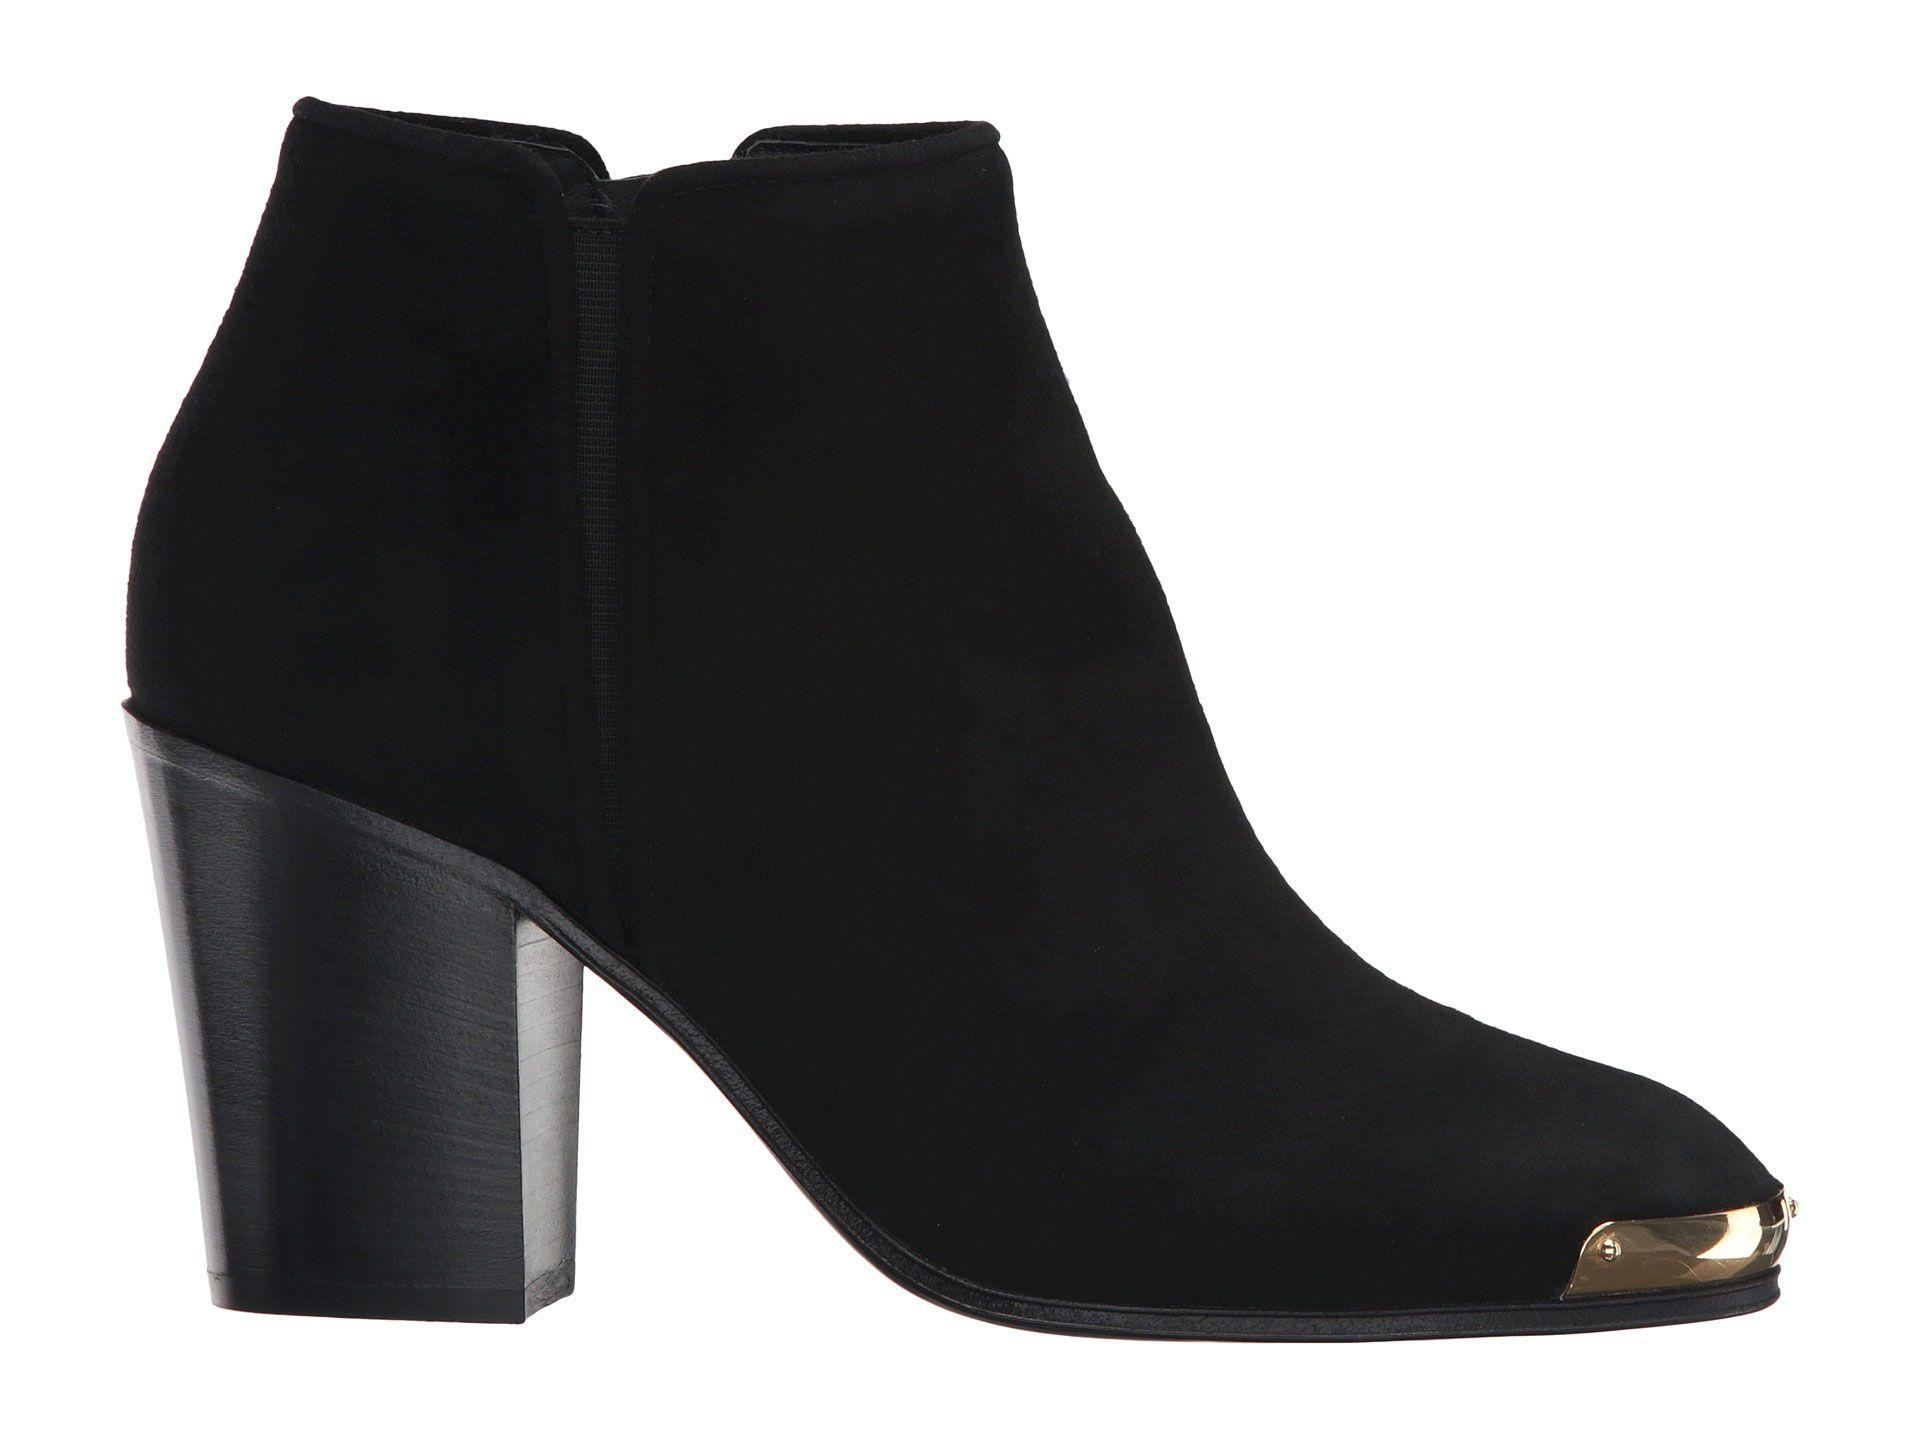 Giuseppe Zanotti Black Suede Ankle Boots in Black - Lyst